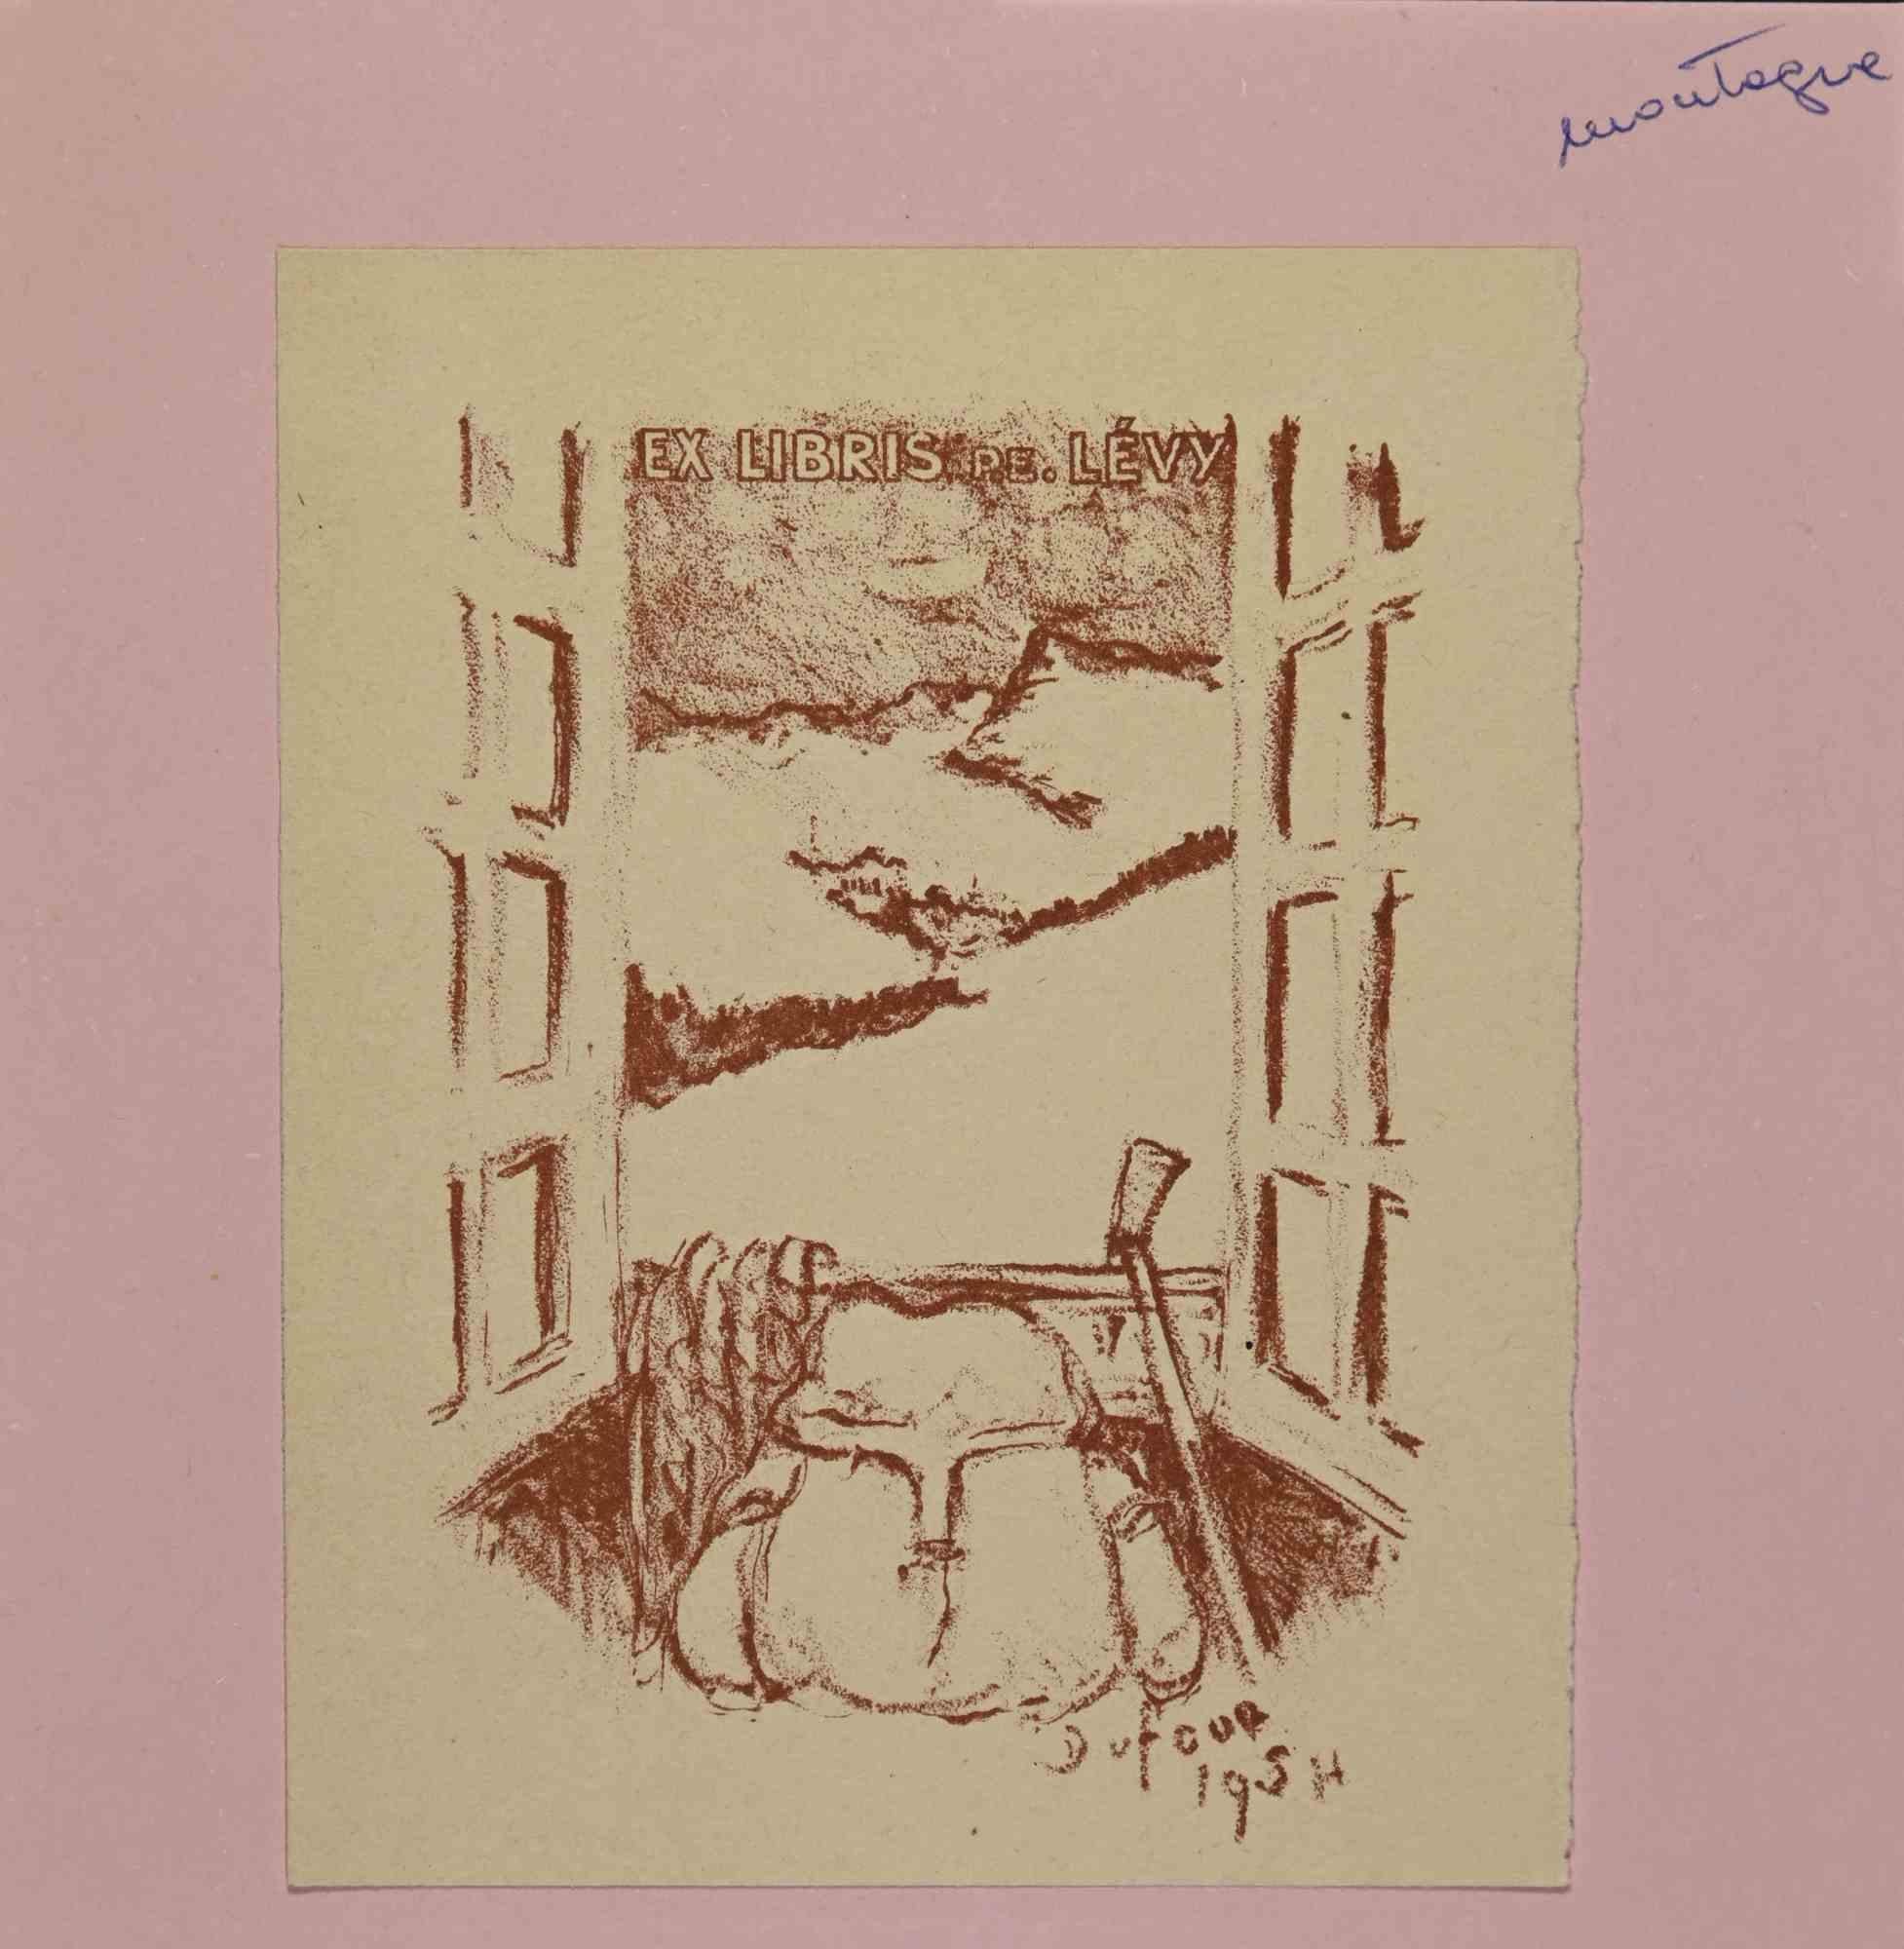 Ex Libris - Lévy is an Artwork realized in 1954, by the French Artist Émilien Dufour (1894-1975). 

Lithograph on paper. Signed on plate and dated on the right margin. 

The work is glued on pink cardboard.

Total dimensions: 16 x 16 cm.

Good